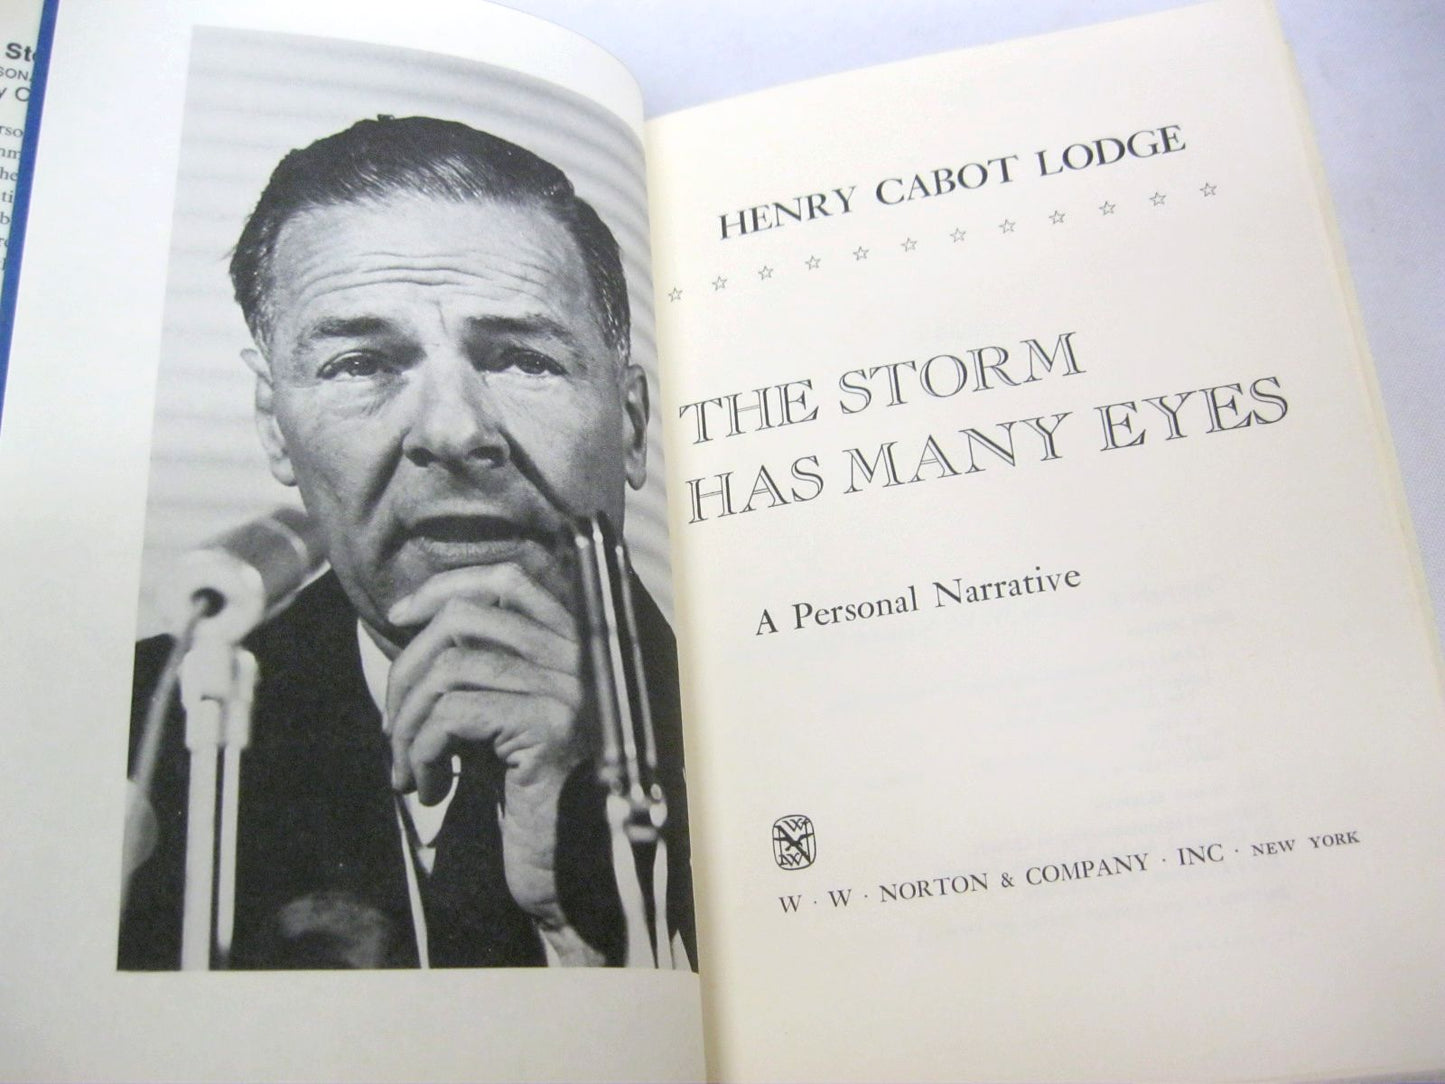 The Storm Has Many Eyes by Henry Cabot Lodge